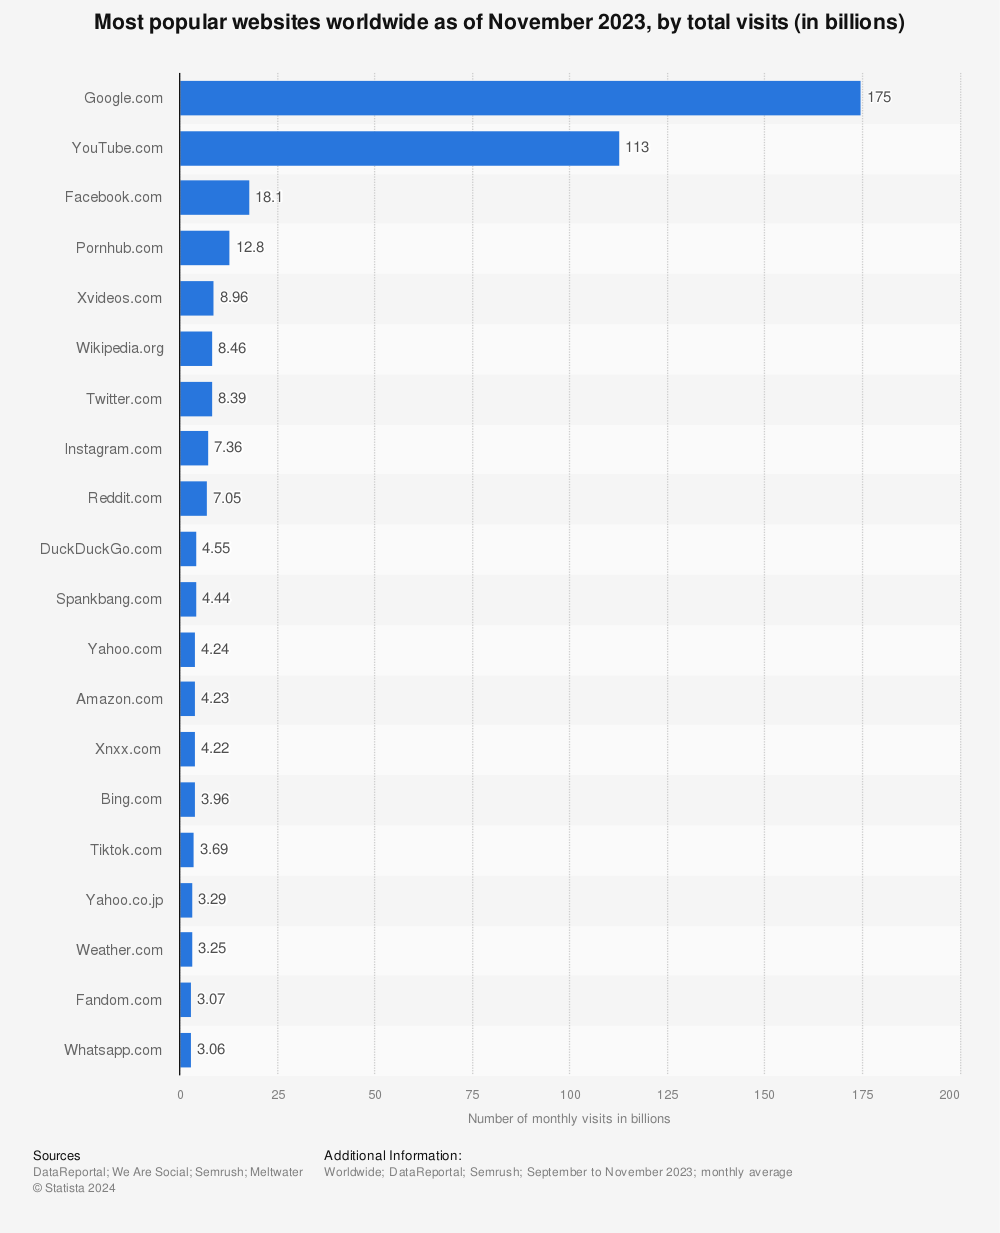 Statistic: Most popular websites worldwide as of June 2021, by total visits (in billions) | Statista